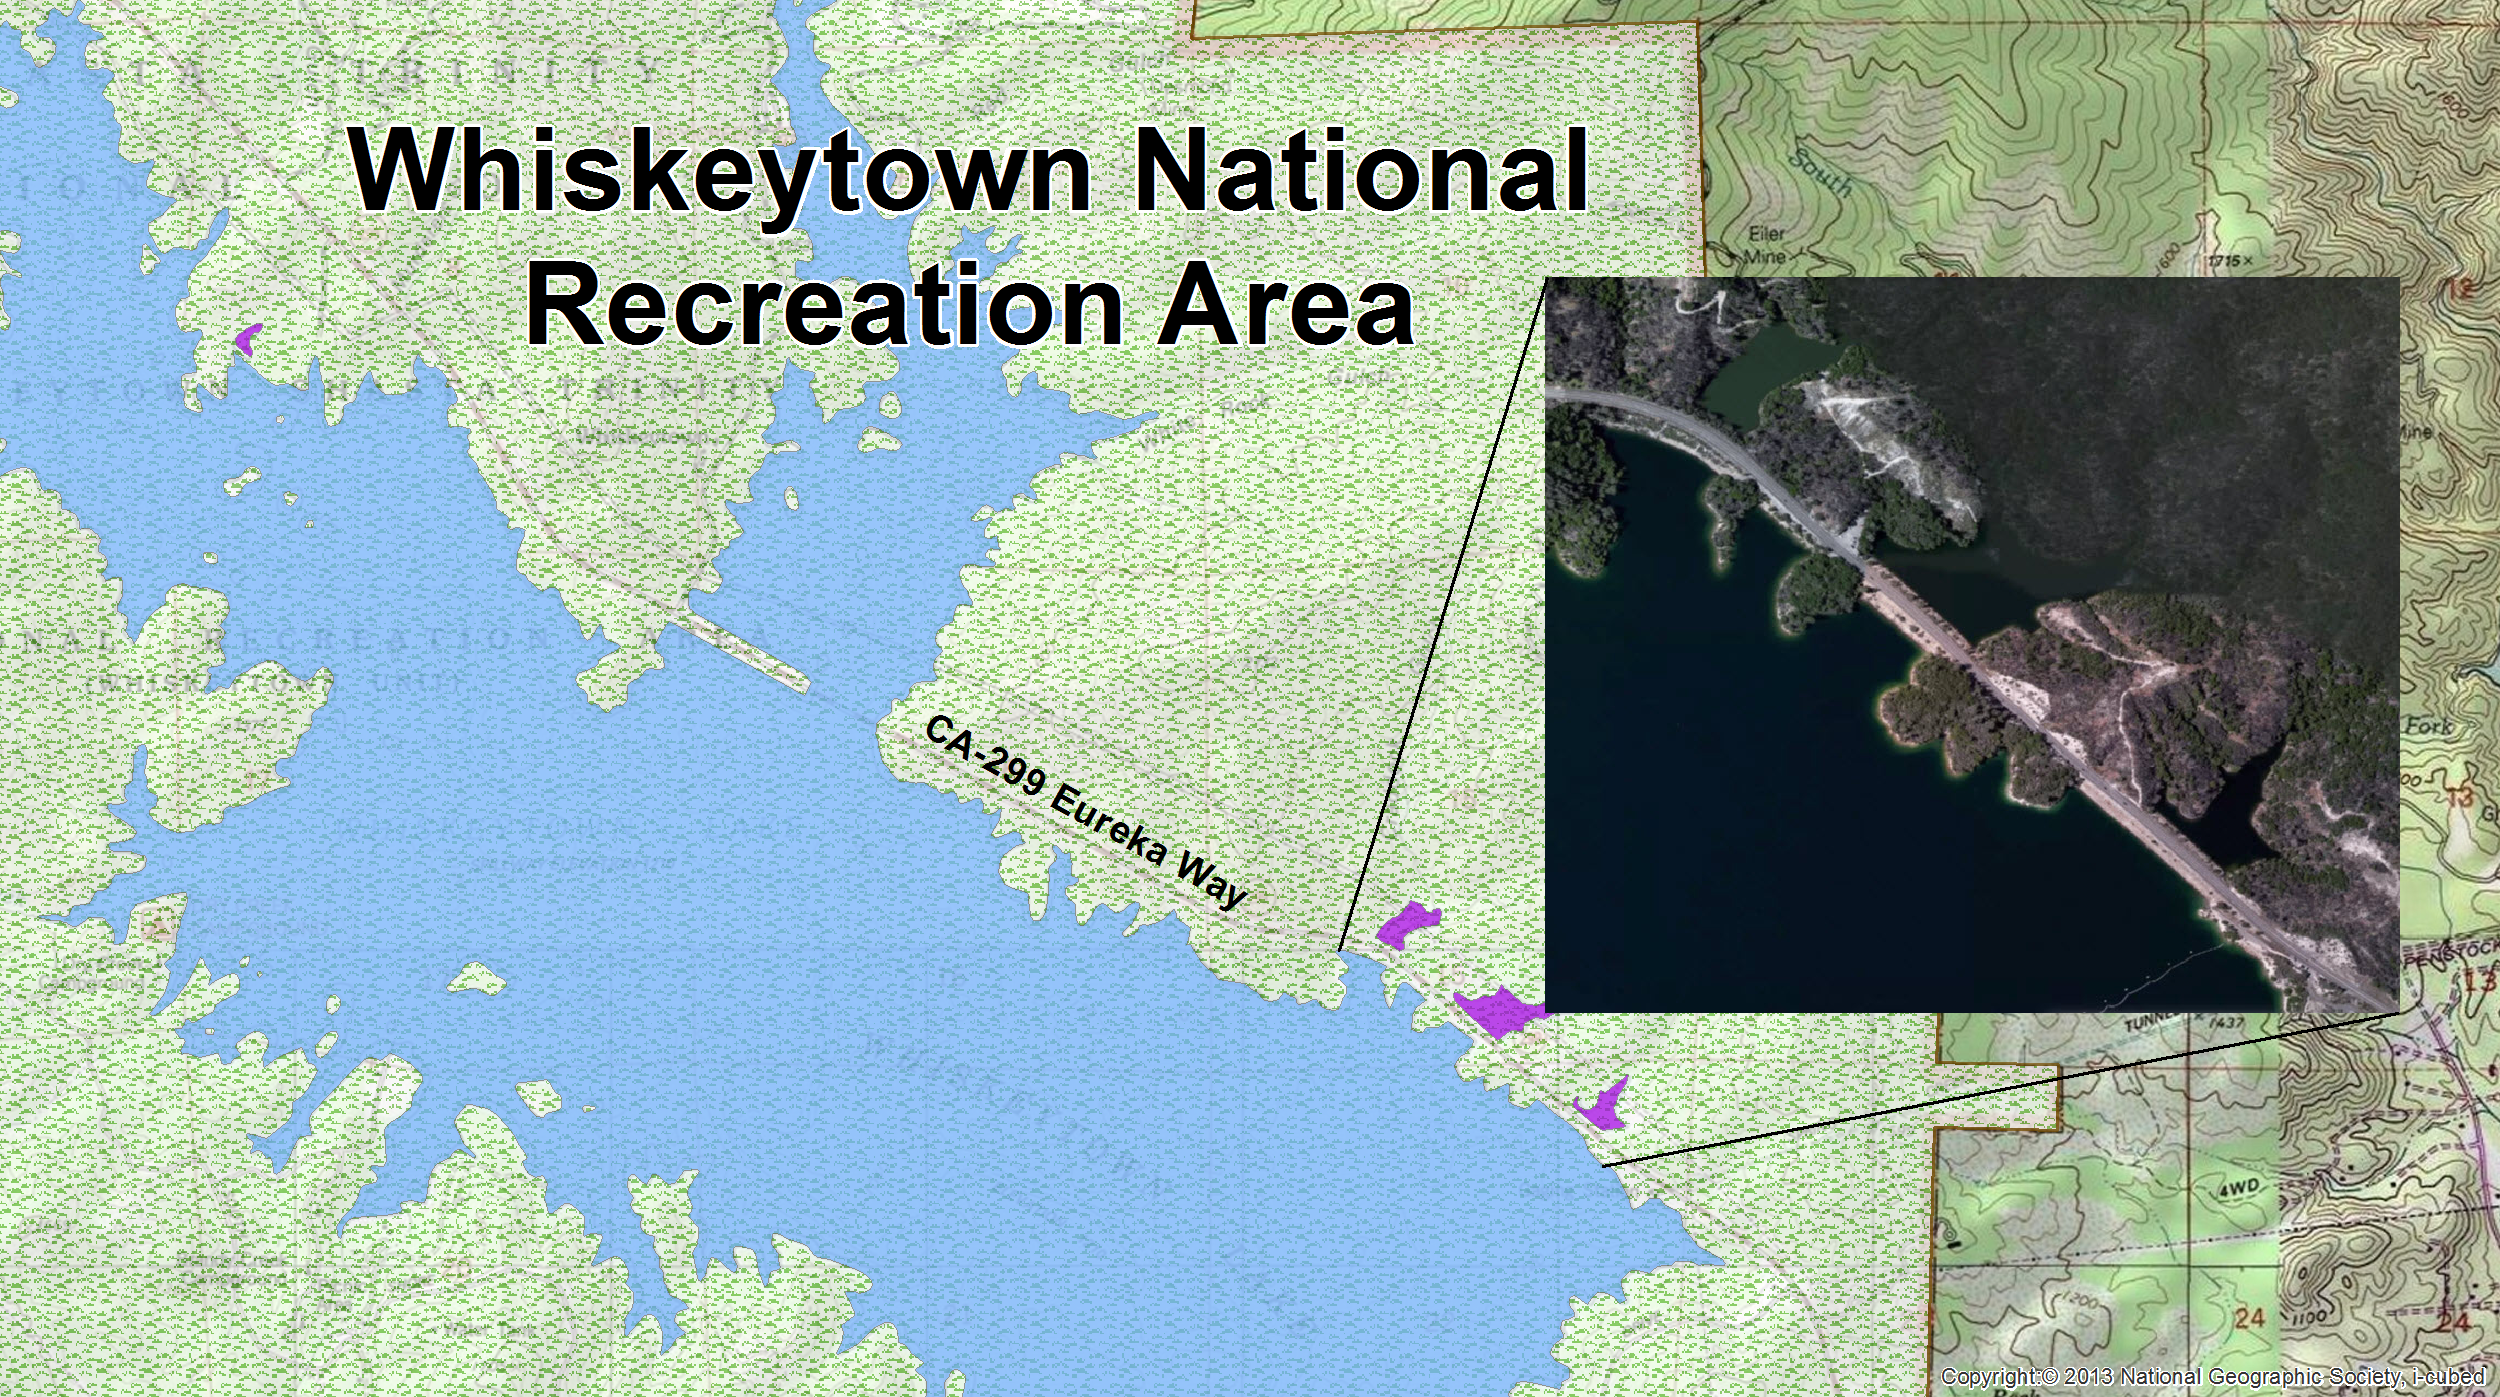 Whiskeytown Lake exists in NHD as seven separate polygons. All seven polygons were assigned identical values in the "LakeCountID" field to account for there only being one Whiskeytown Lake.